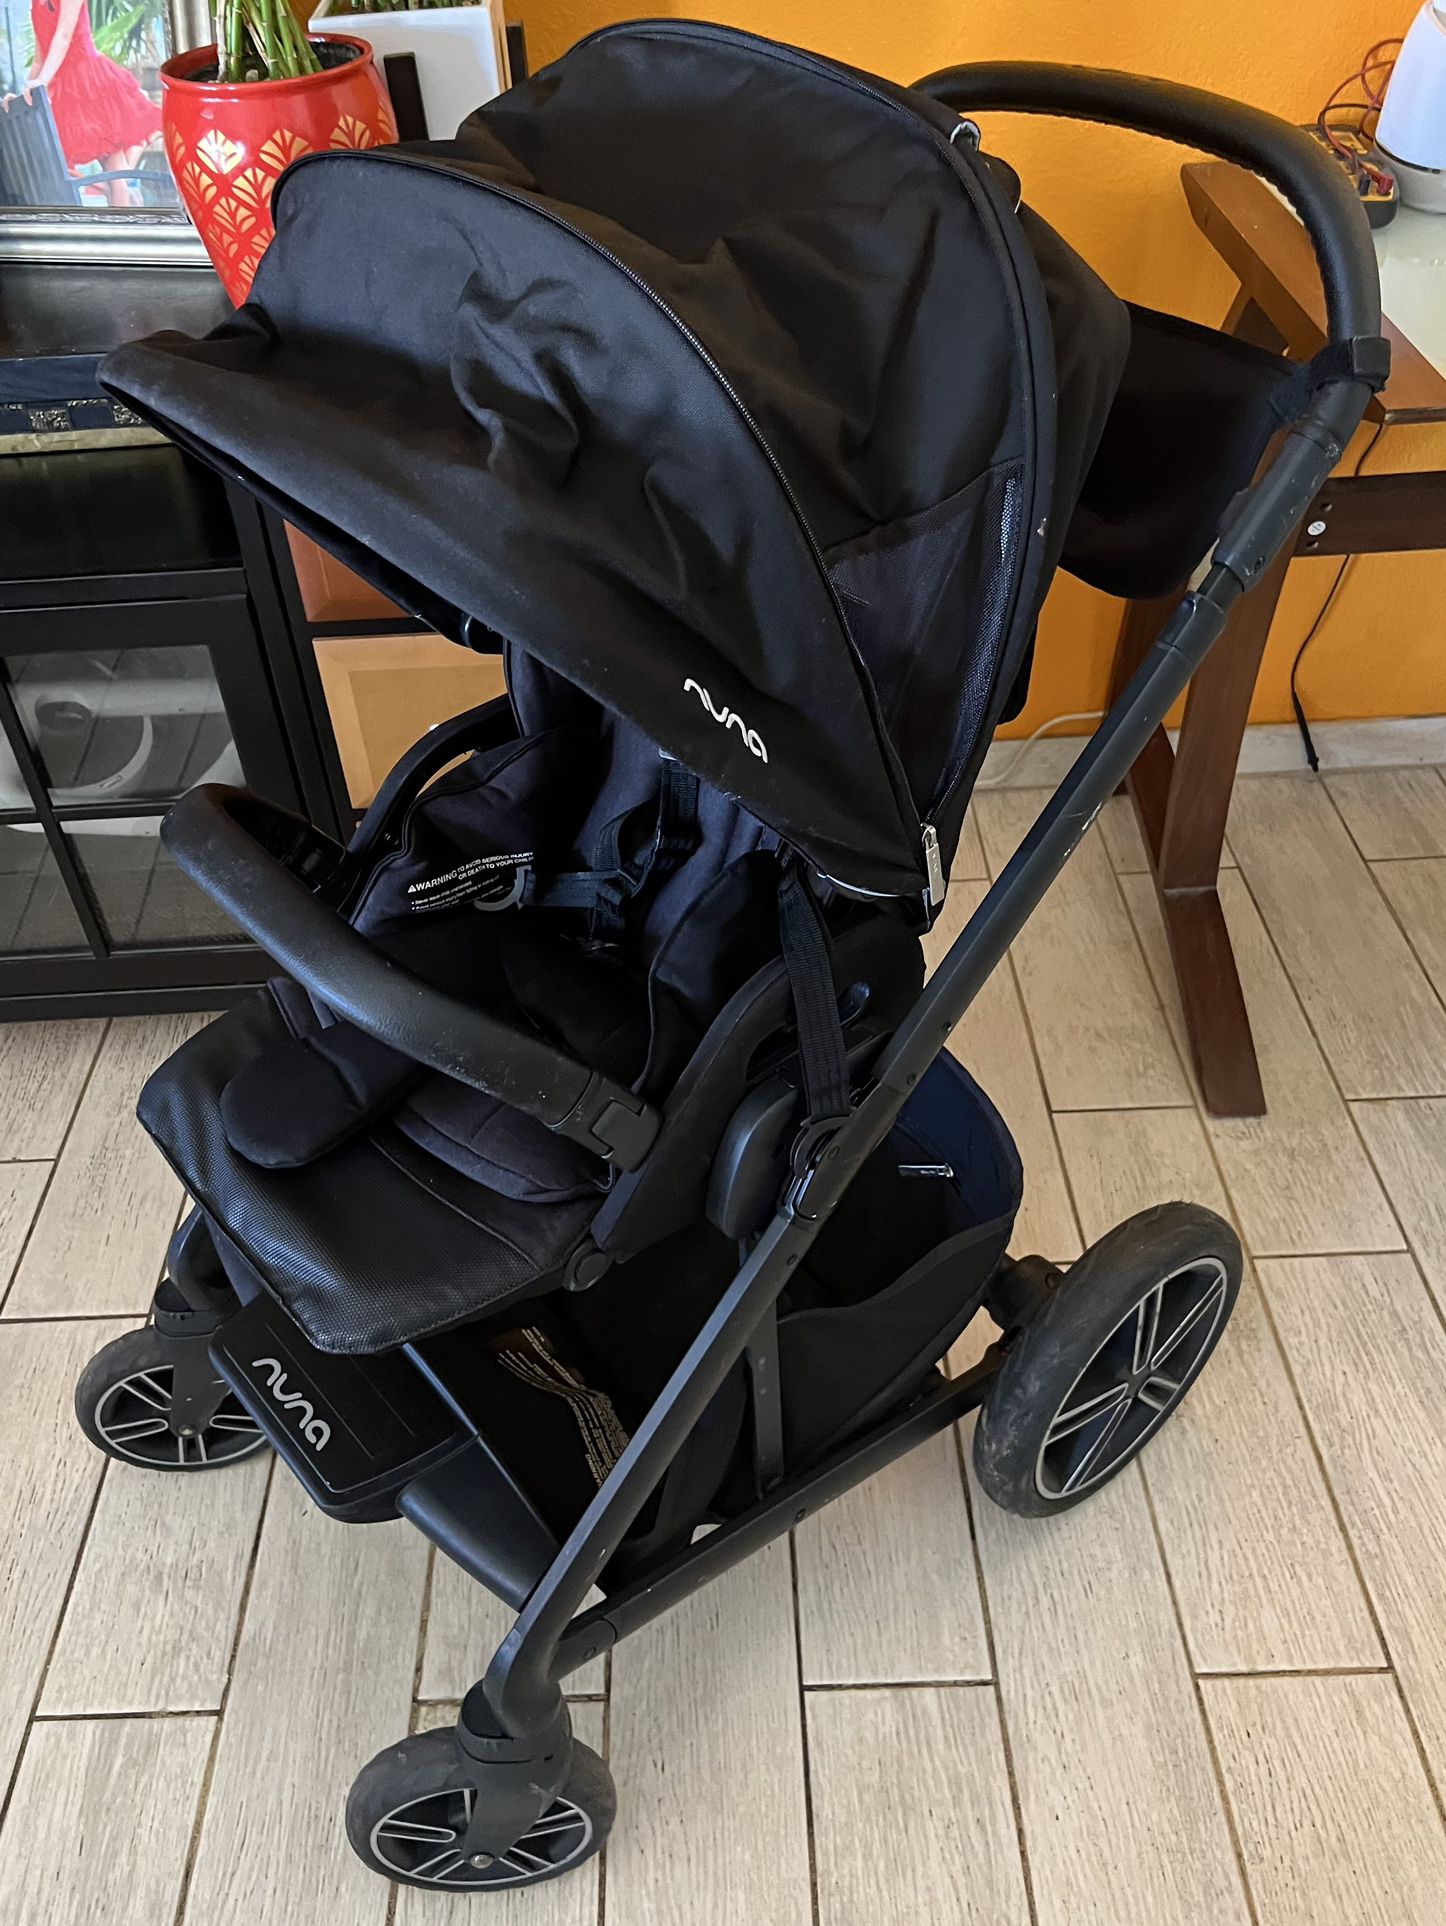 NUNA Mixx 2 Black Stroller in Excelente Conditions Model st-41-001 Baby Infant Toddlers Gear Boy Girl Neutral Gender Outdoor  RETAILS FOR $800 plus NU